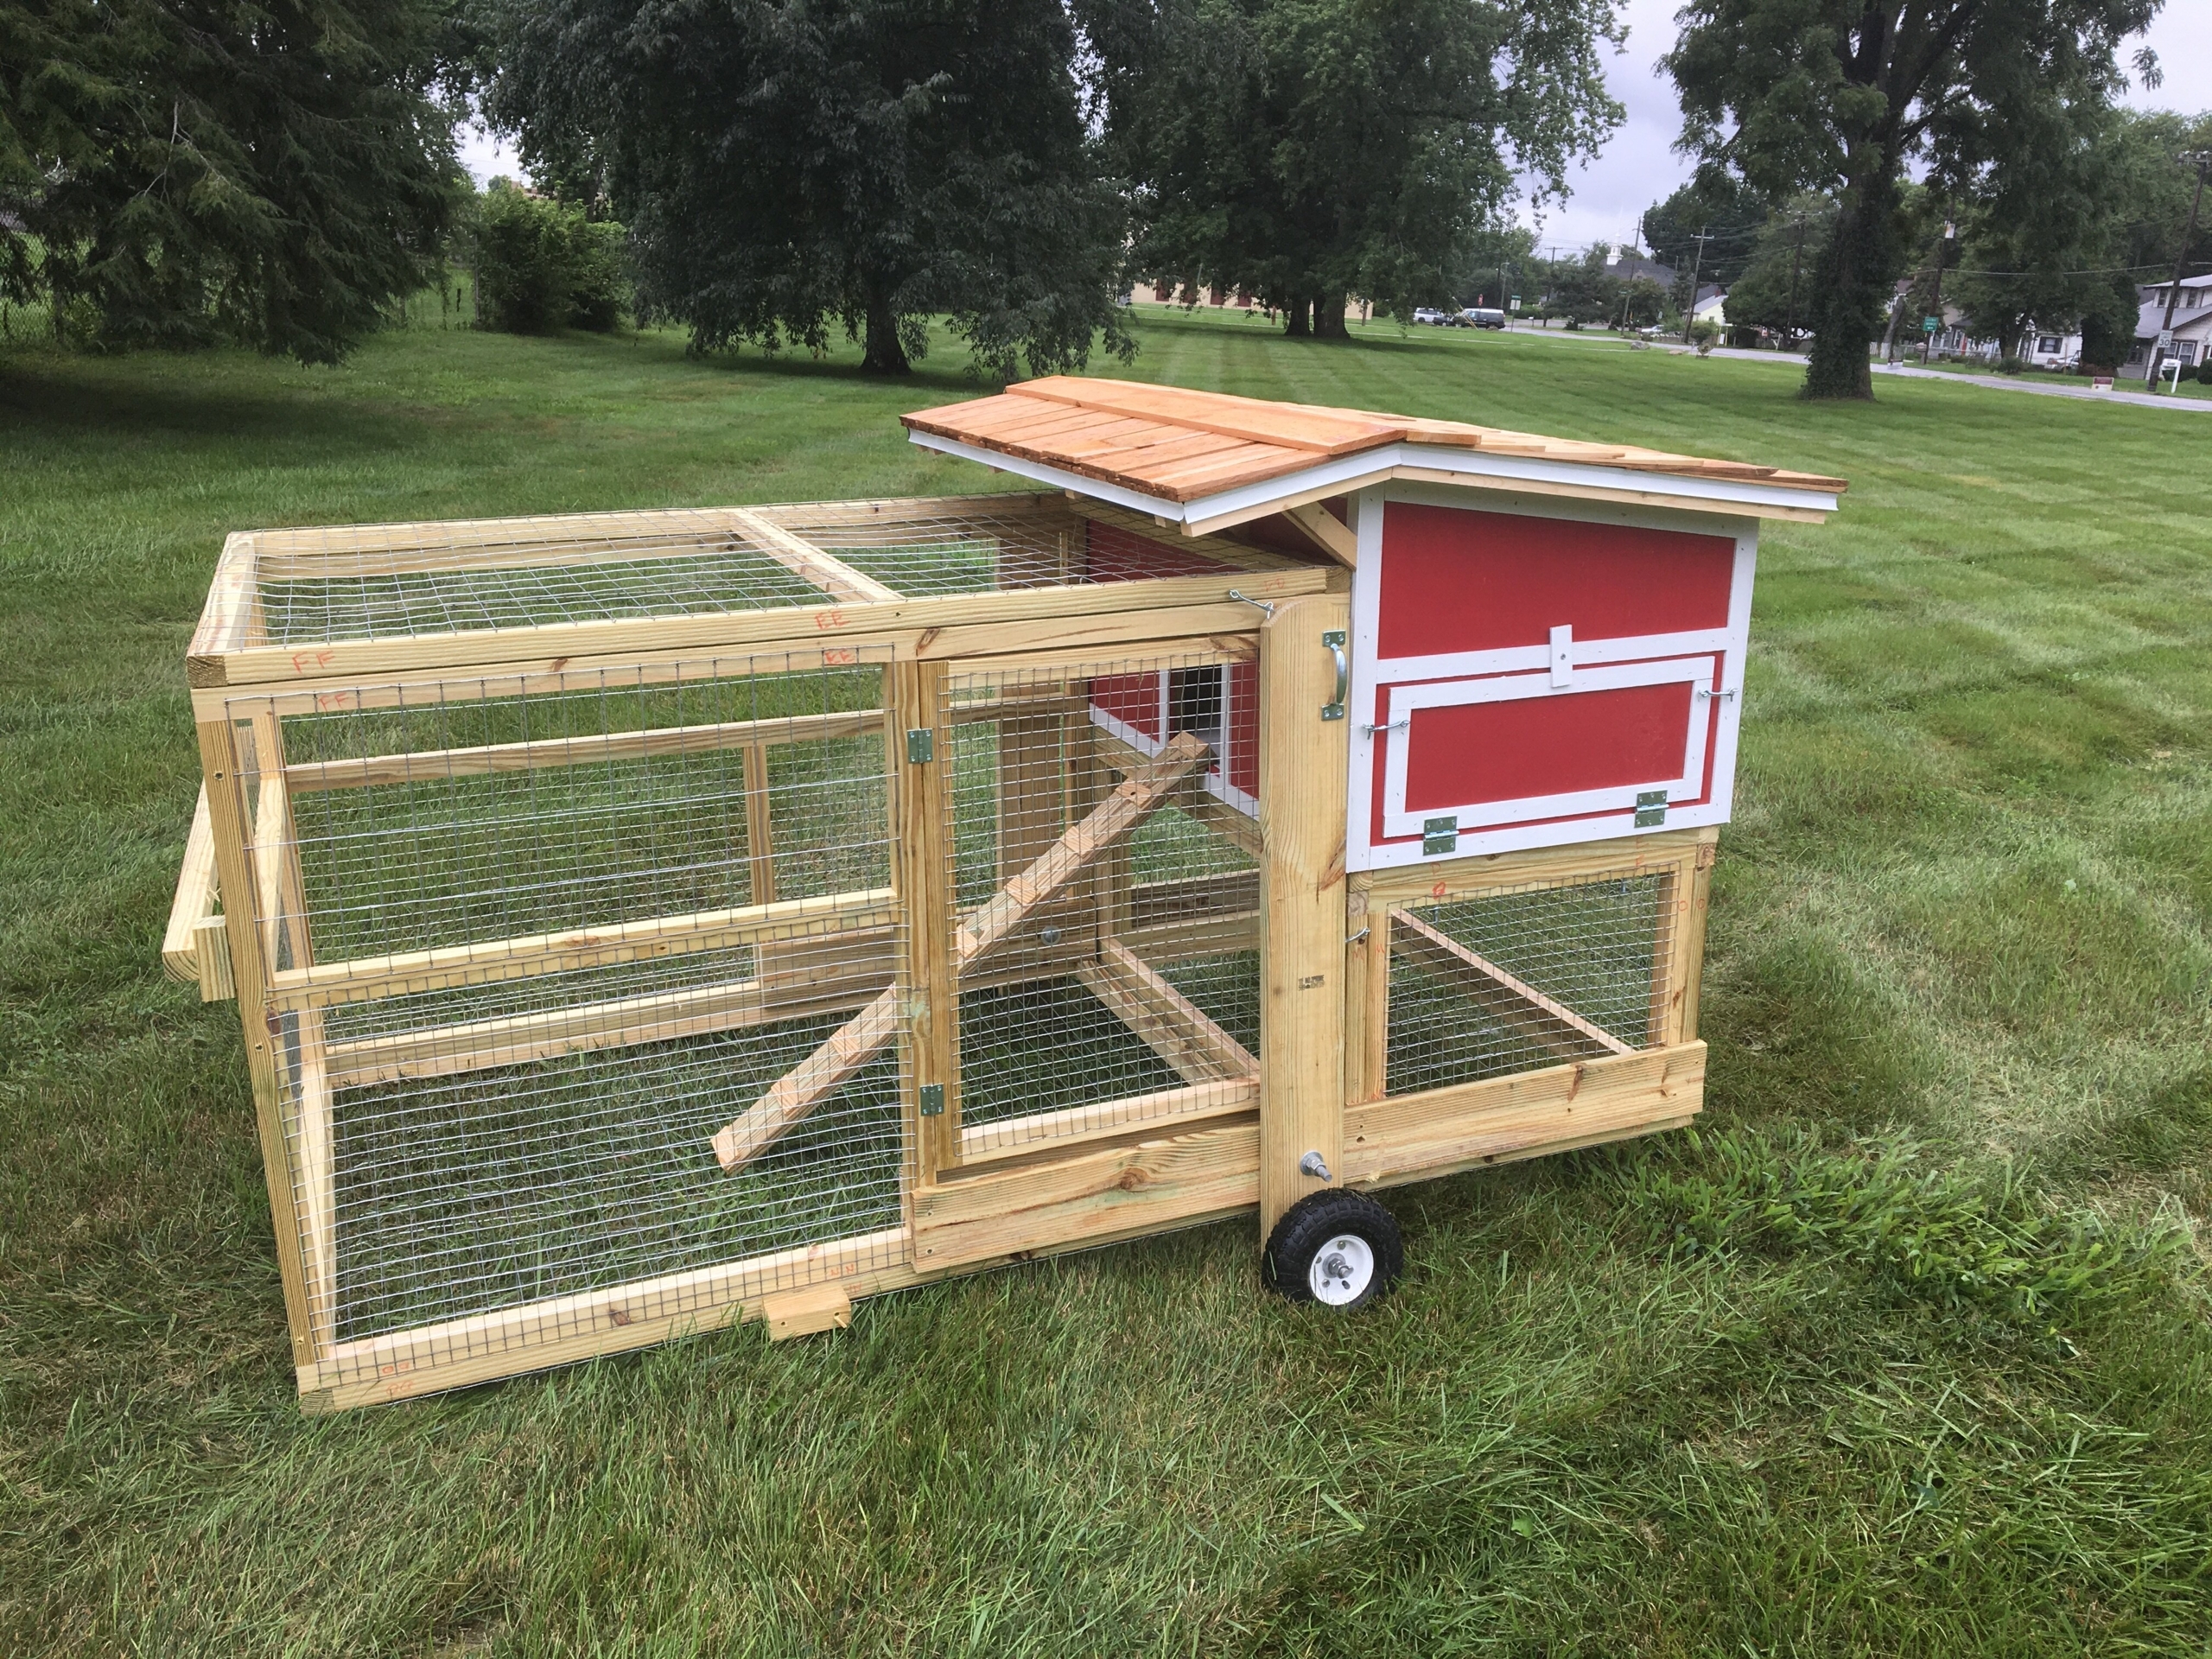 MEDIUM RITE FARM PRODUCT LIFETIME SERIES MOBILE CHICKEN RUN COOP POULTRY TRACTOR 